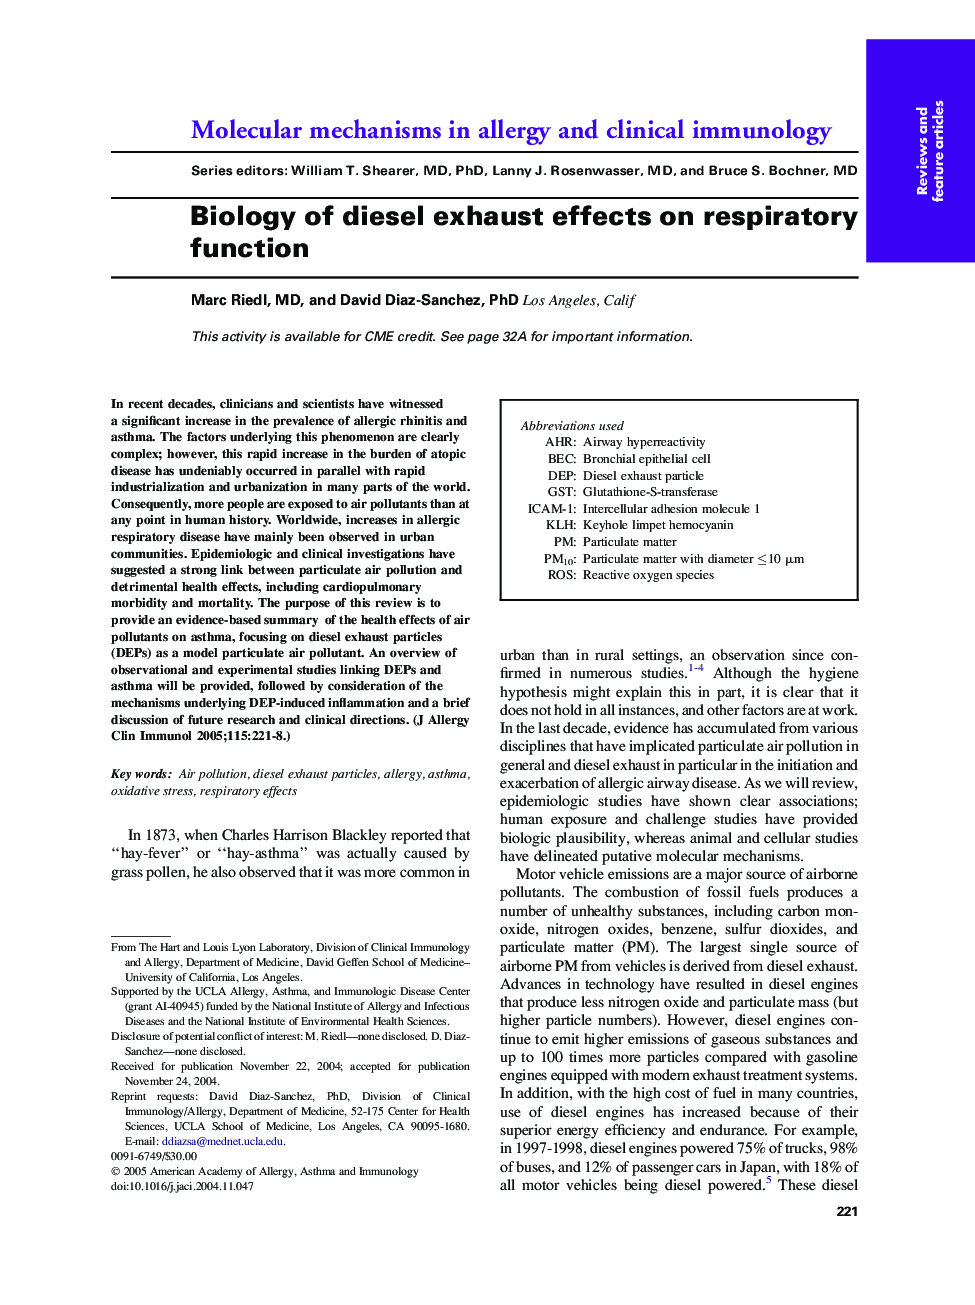 Biology of diesel exhaust effects on respiratory function